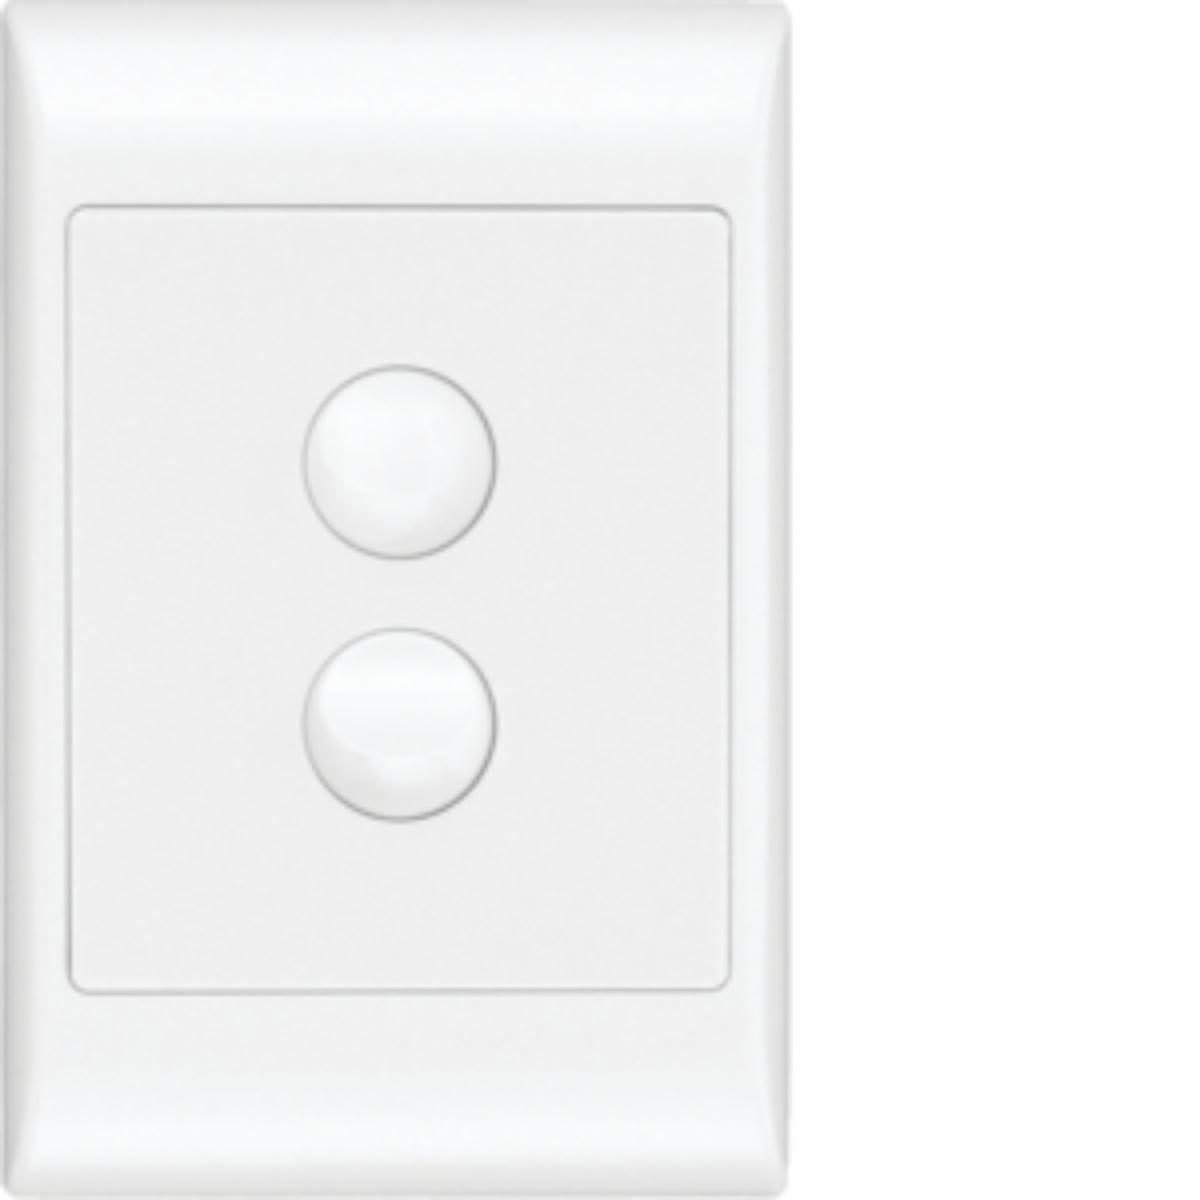 SWITCH LARGE PLATE SWITCH VERTICAL 2G